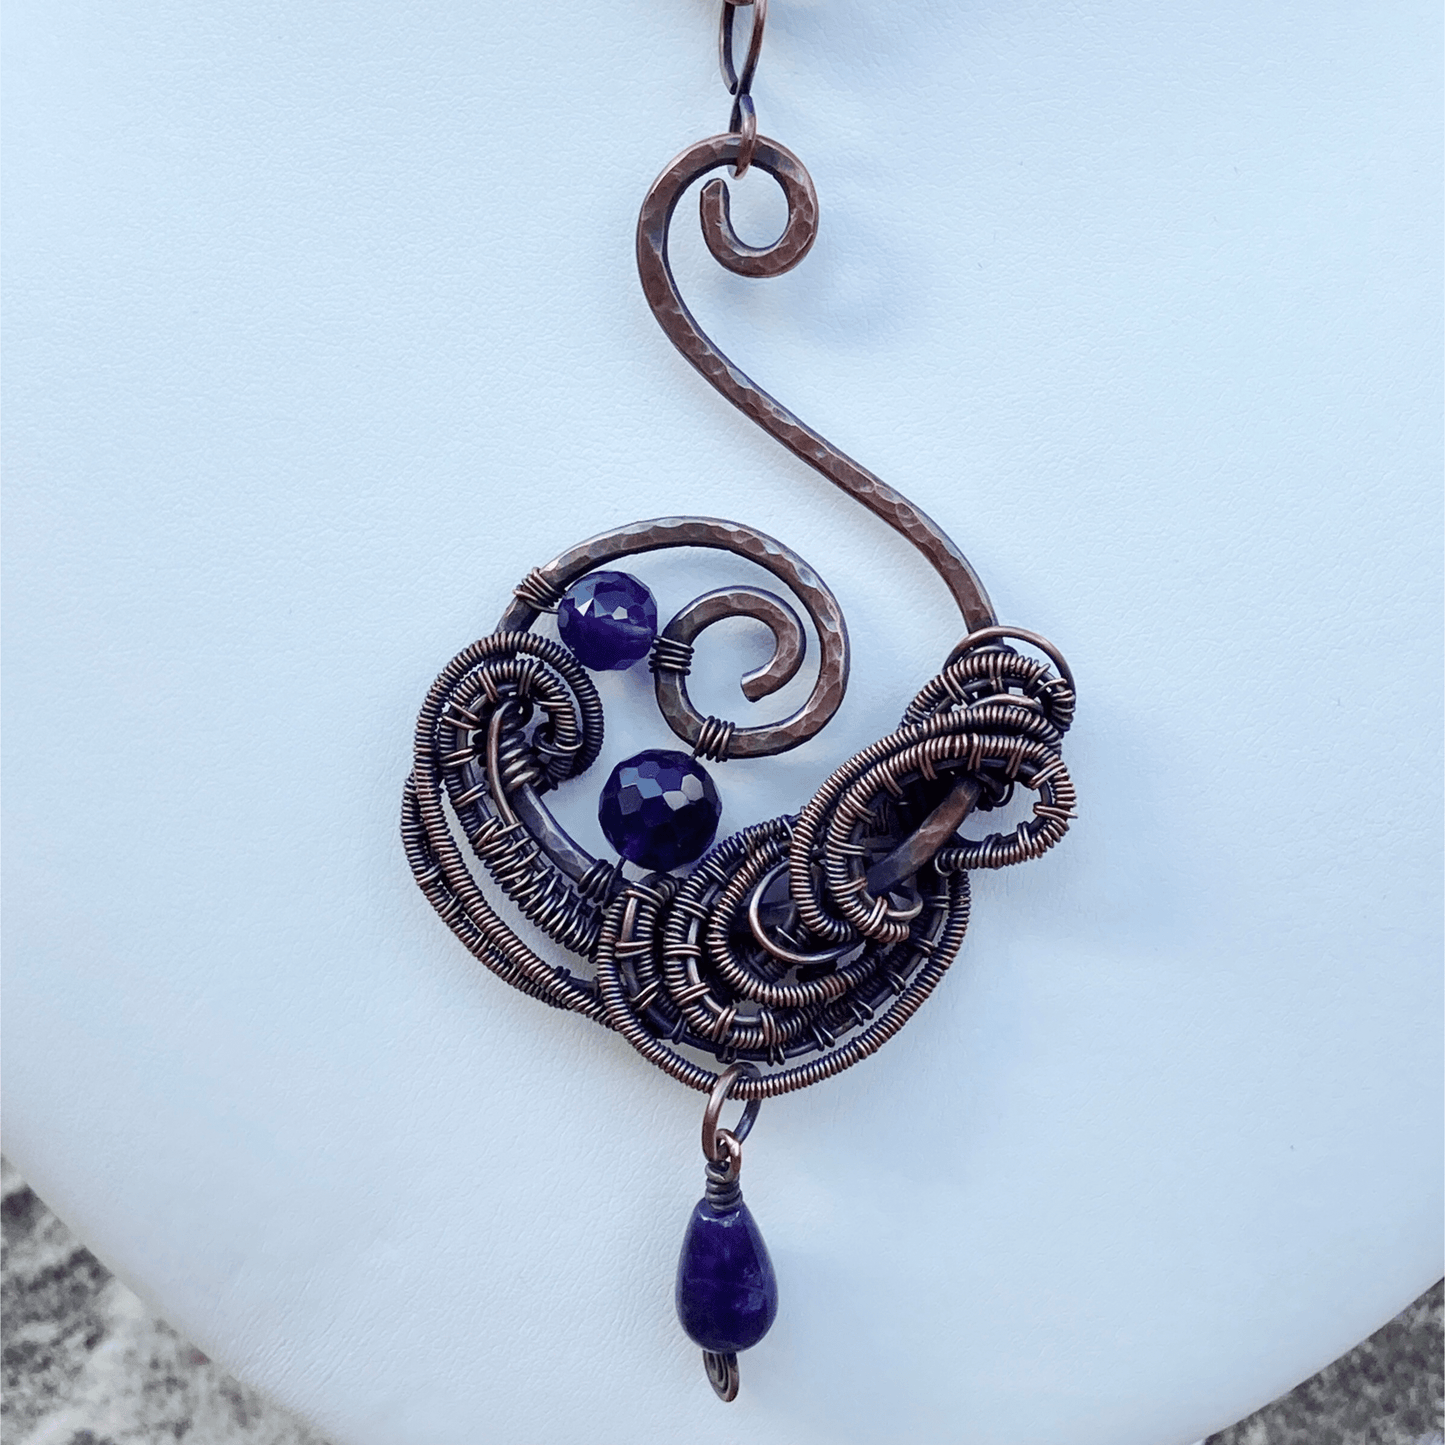 Handmade Amethyst Gemstone And Copper Wire Wrapped Pendant Necklace